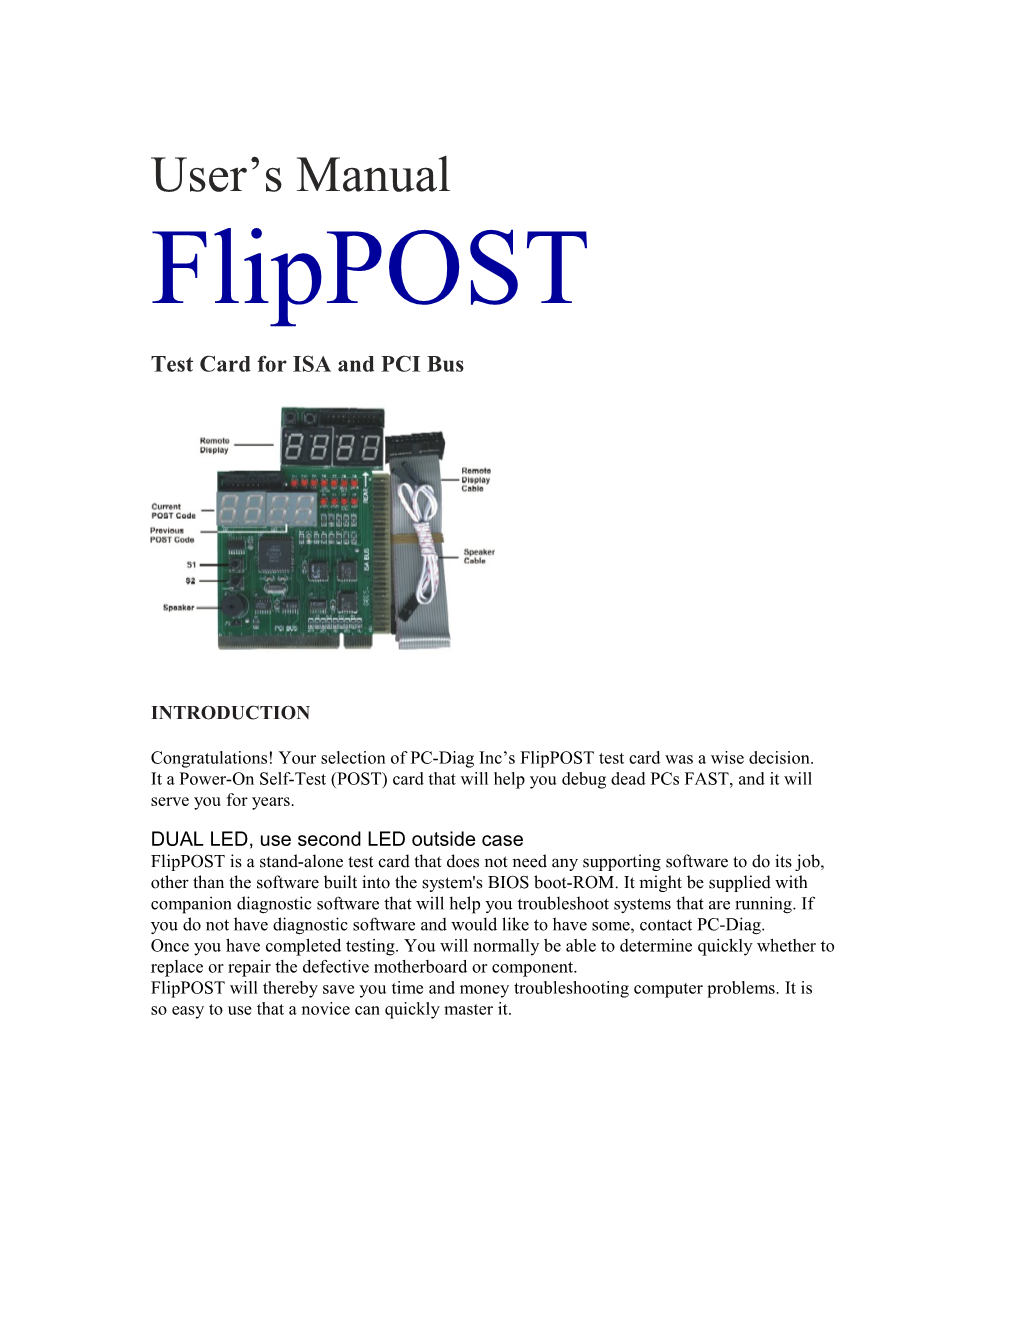 Power Self-Test CARD for ISA and PCI Bus Pcs